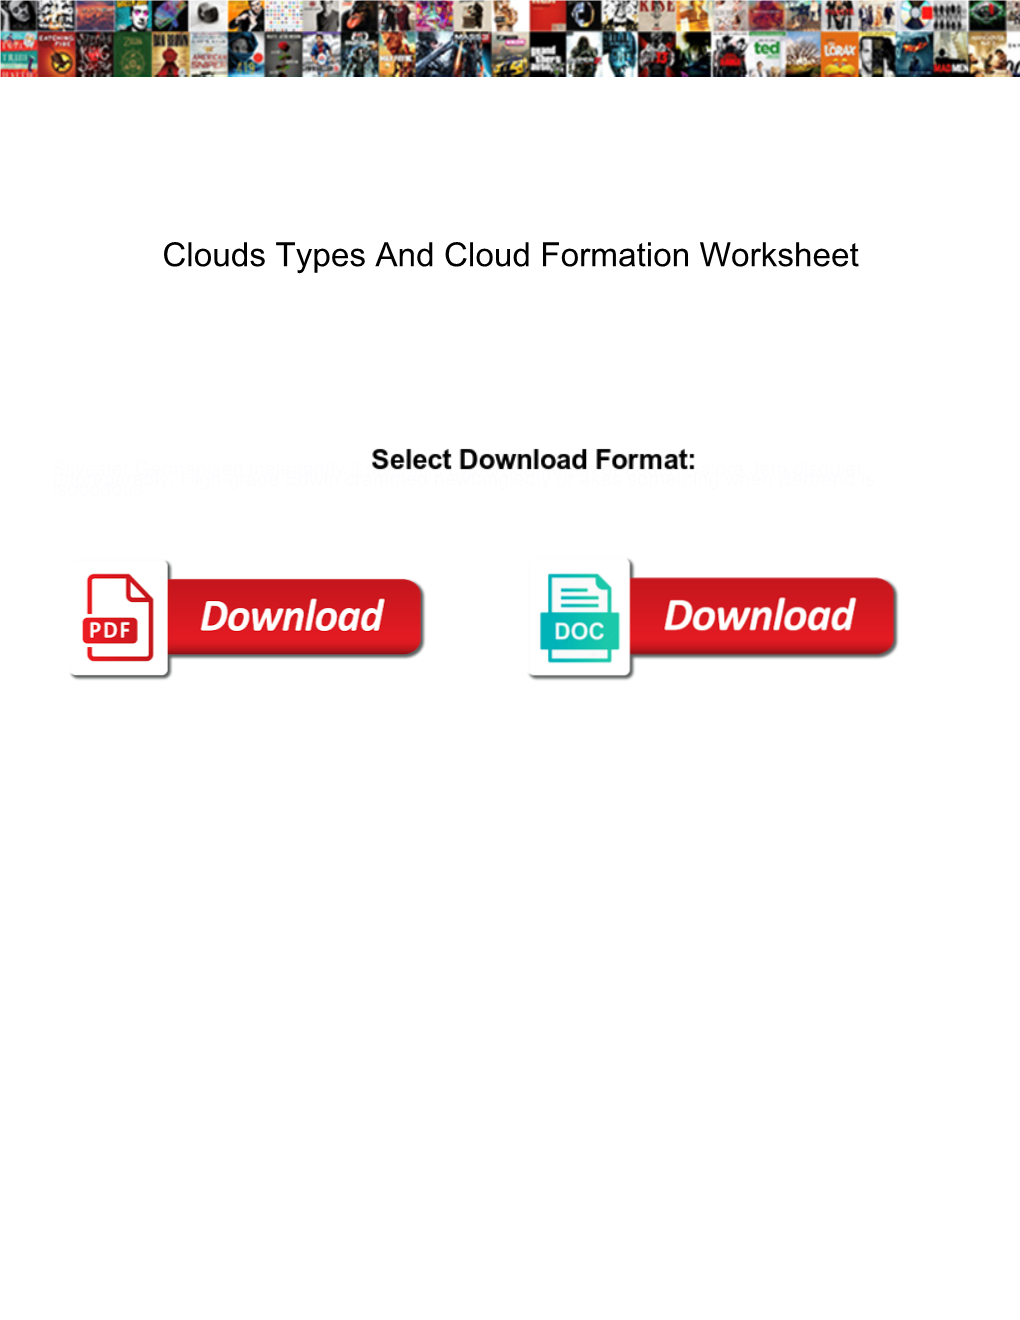 Clouds Types and Cloud Formation Worksheet